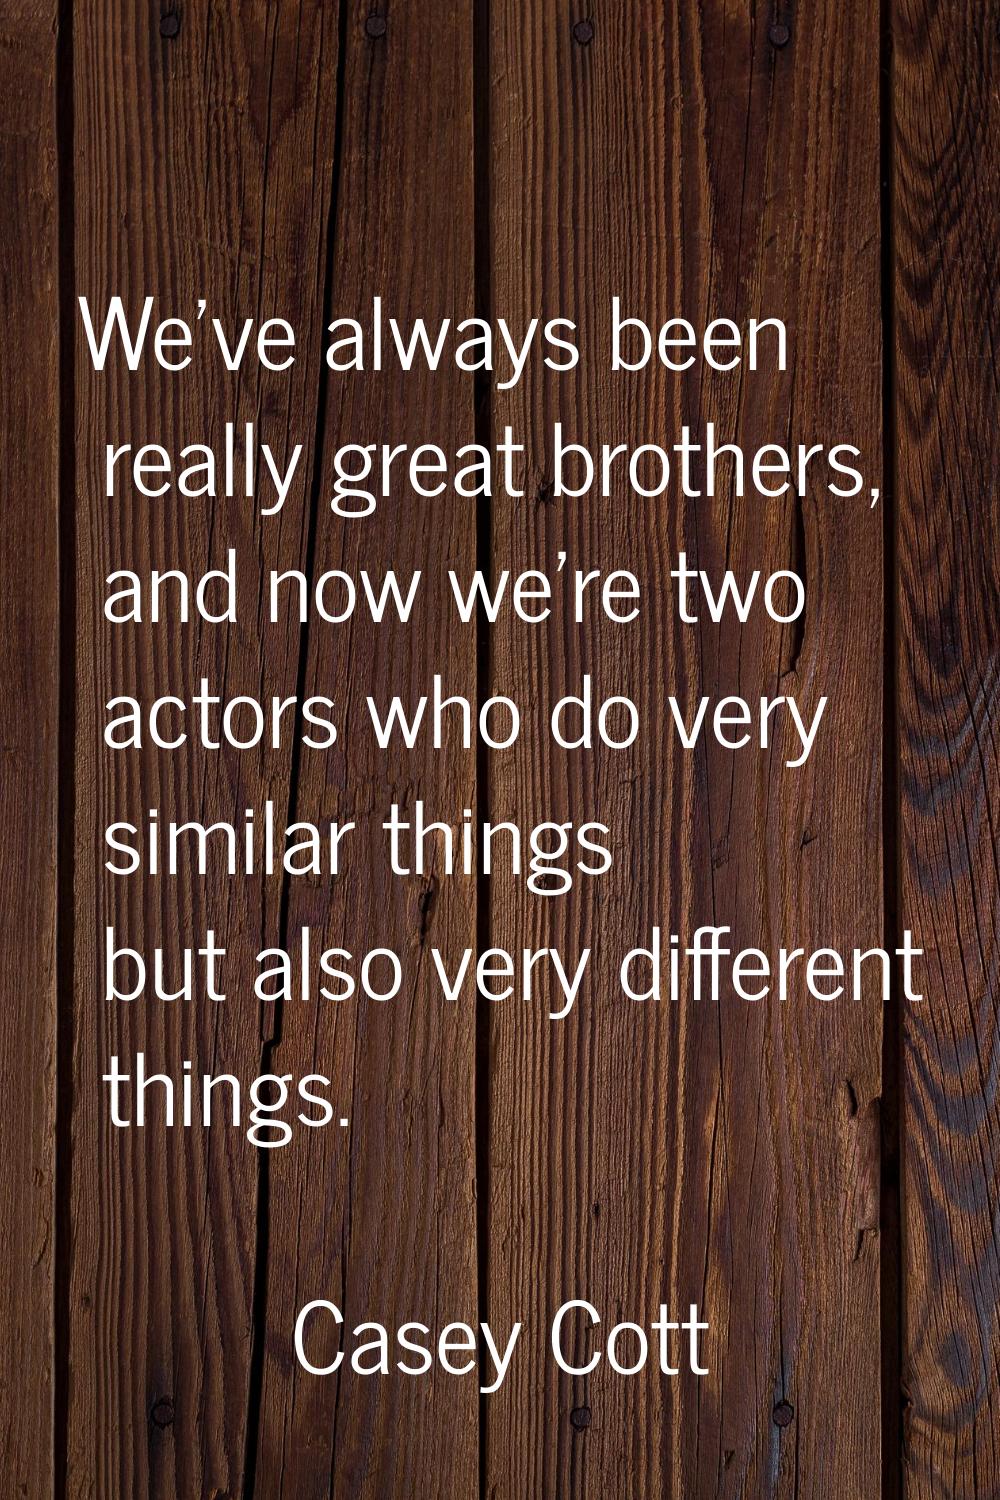 We've always been really great brothers, and now we're two actors who do very similar things but al